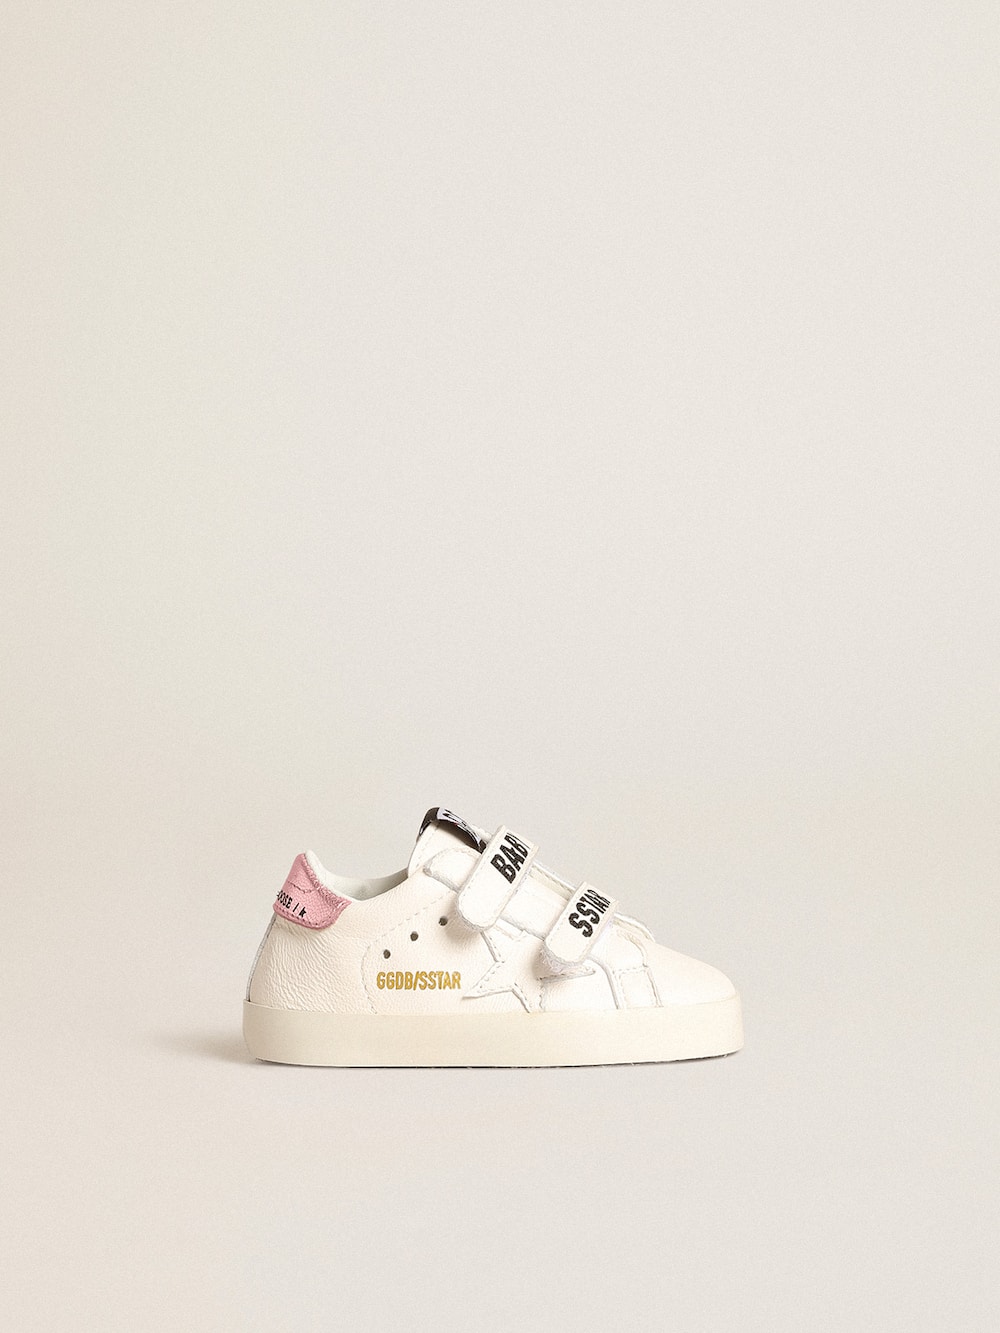 Golden Goose - Baby School set in white nappa leather with pink leather heel tab in 